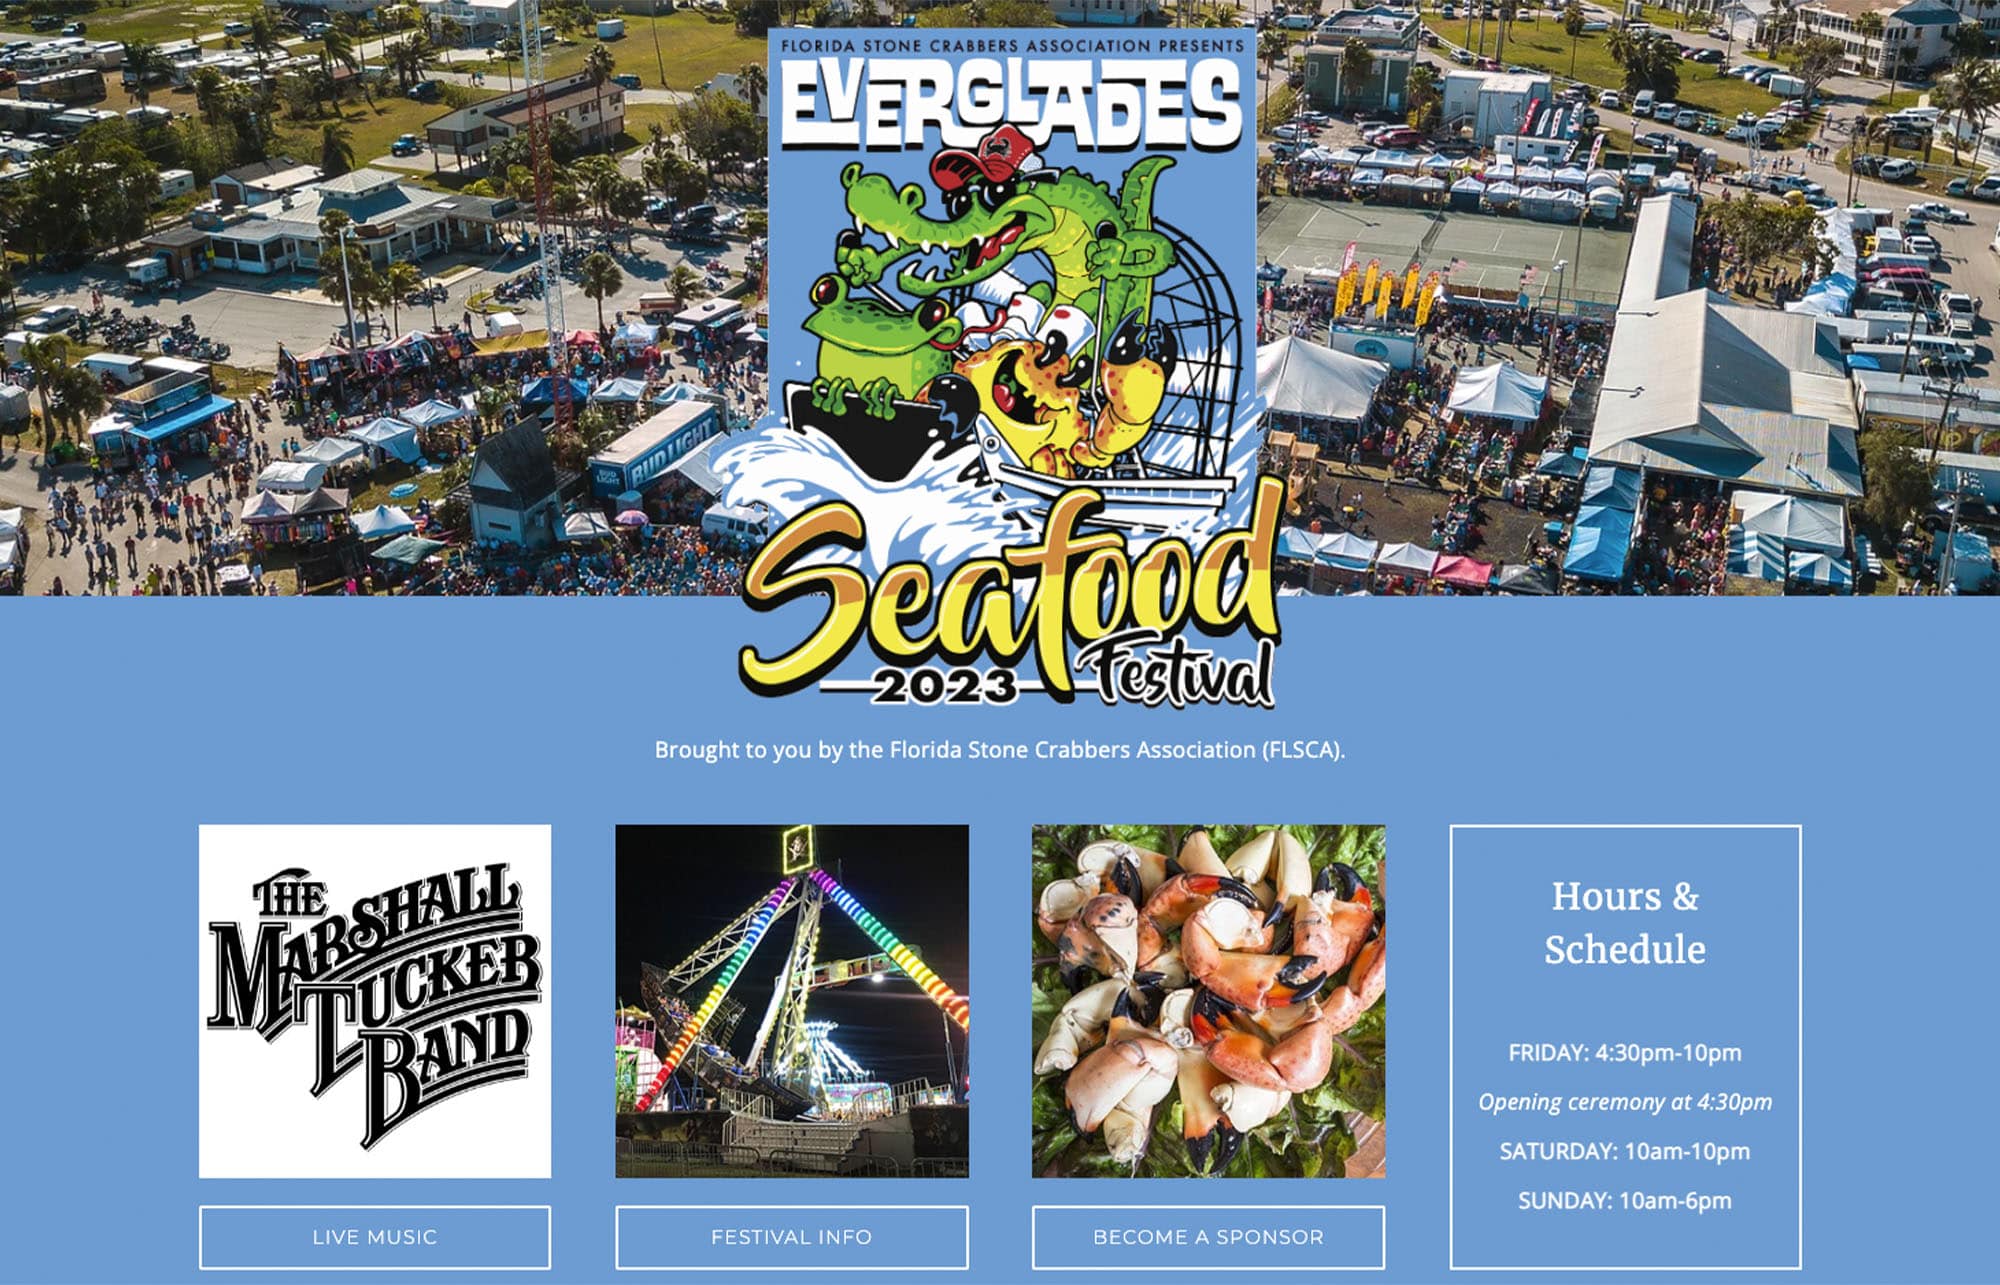 Paradise Web Single Page Event Website Design and Build for Everglades Seafood Festival